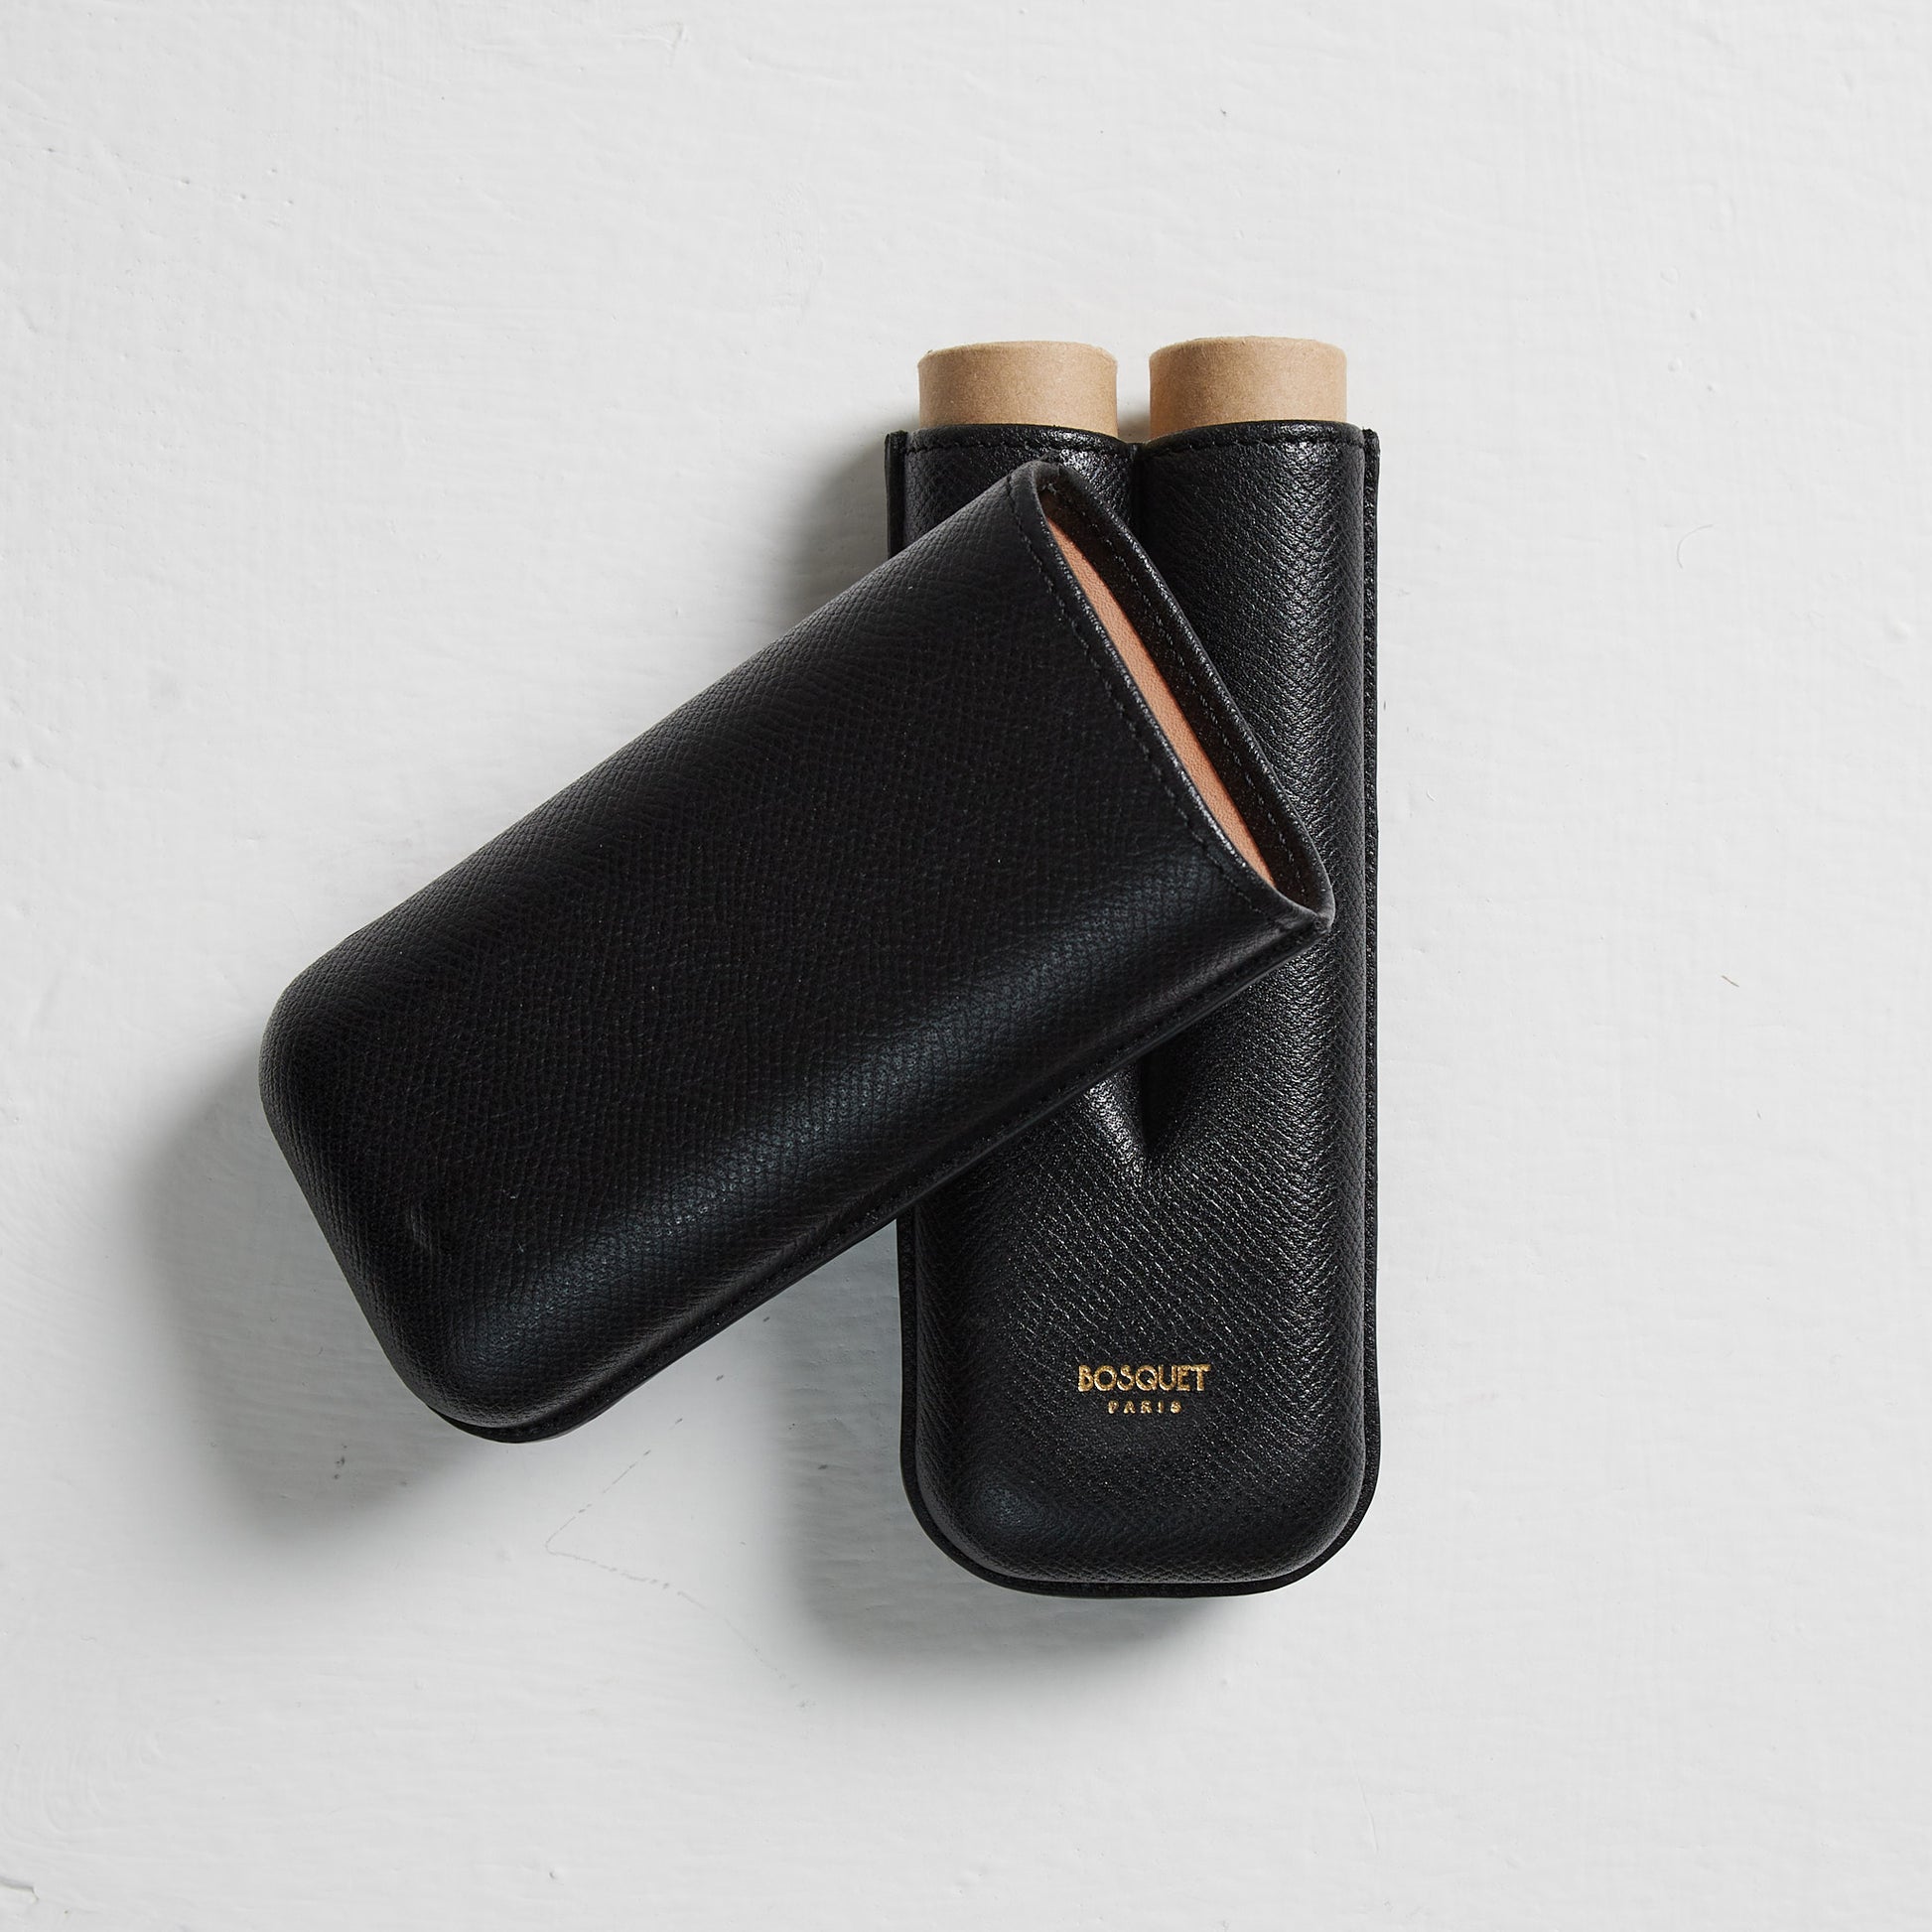 Stylish Grained Calf Leather 2 Finger Cigar Case in Black